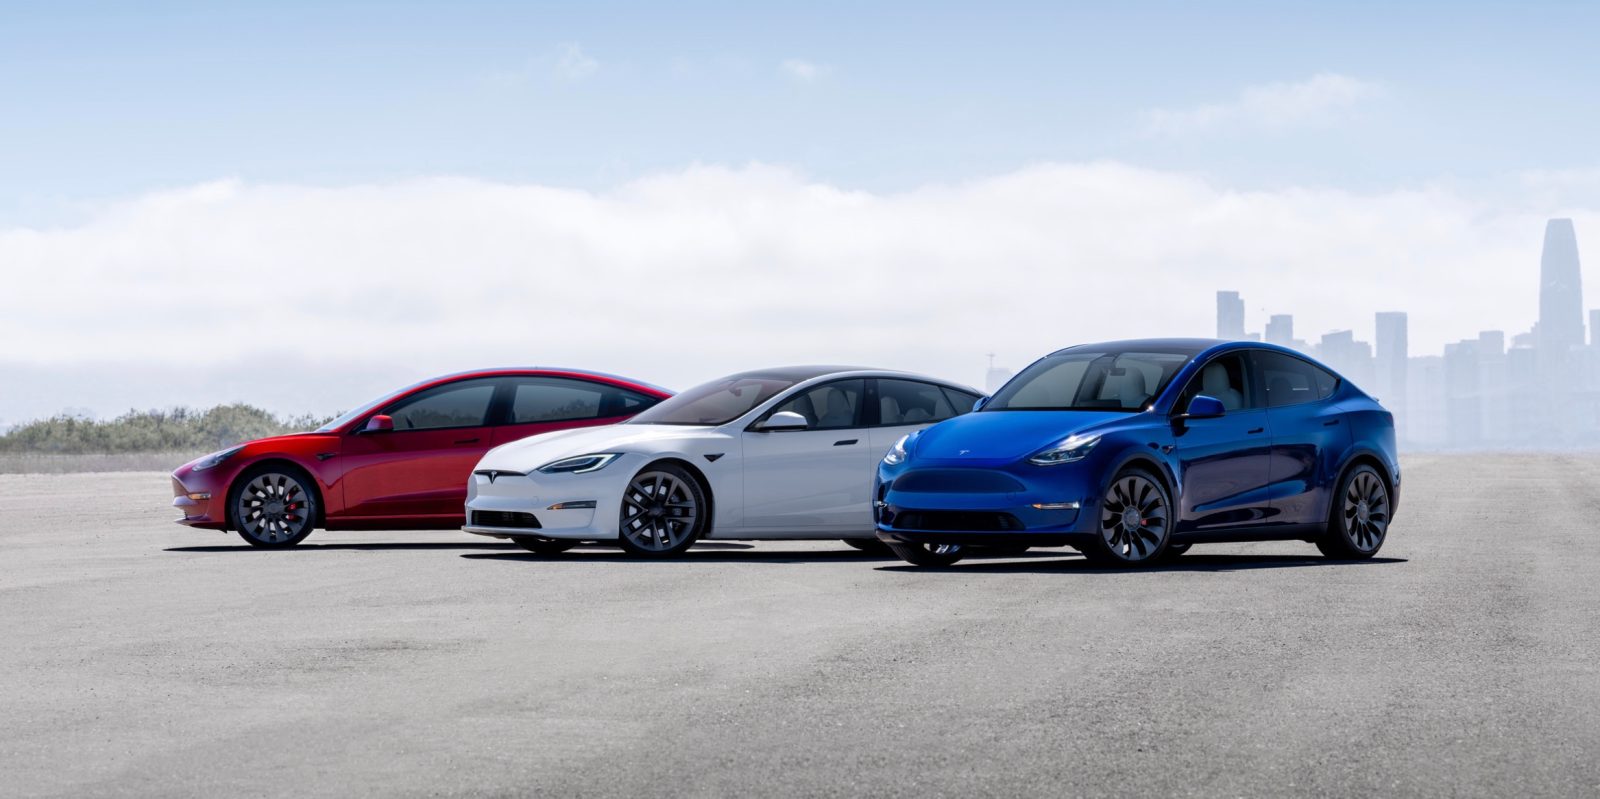 Tesla has the top 3 electric cars in the US, and it’s not even close